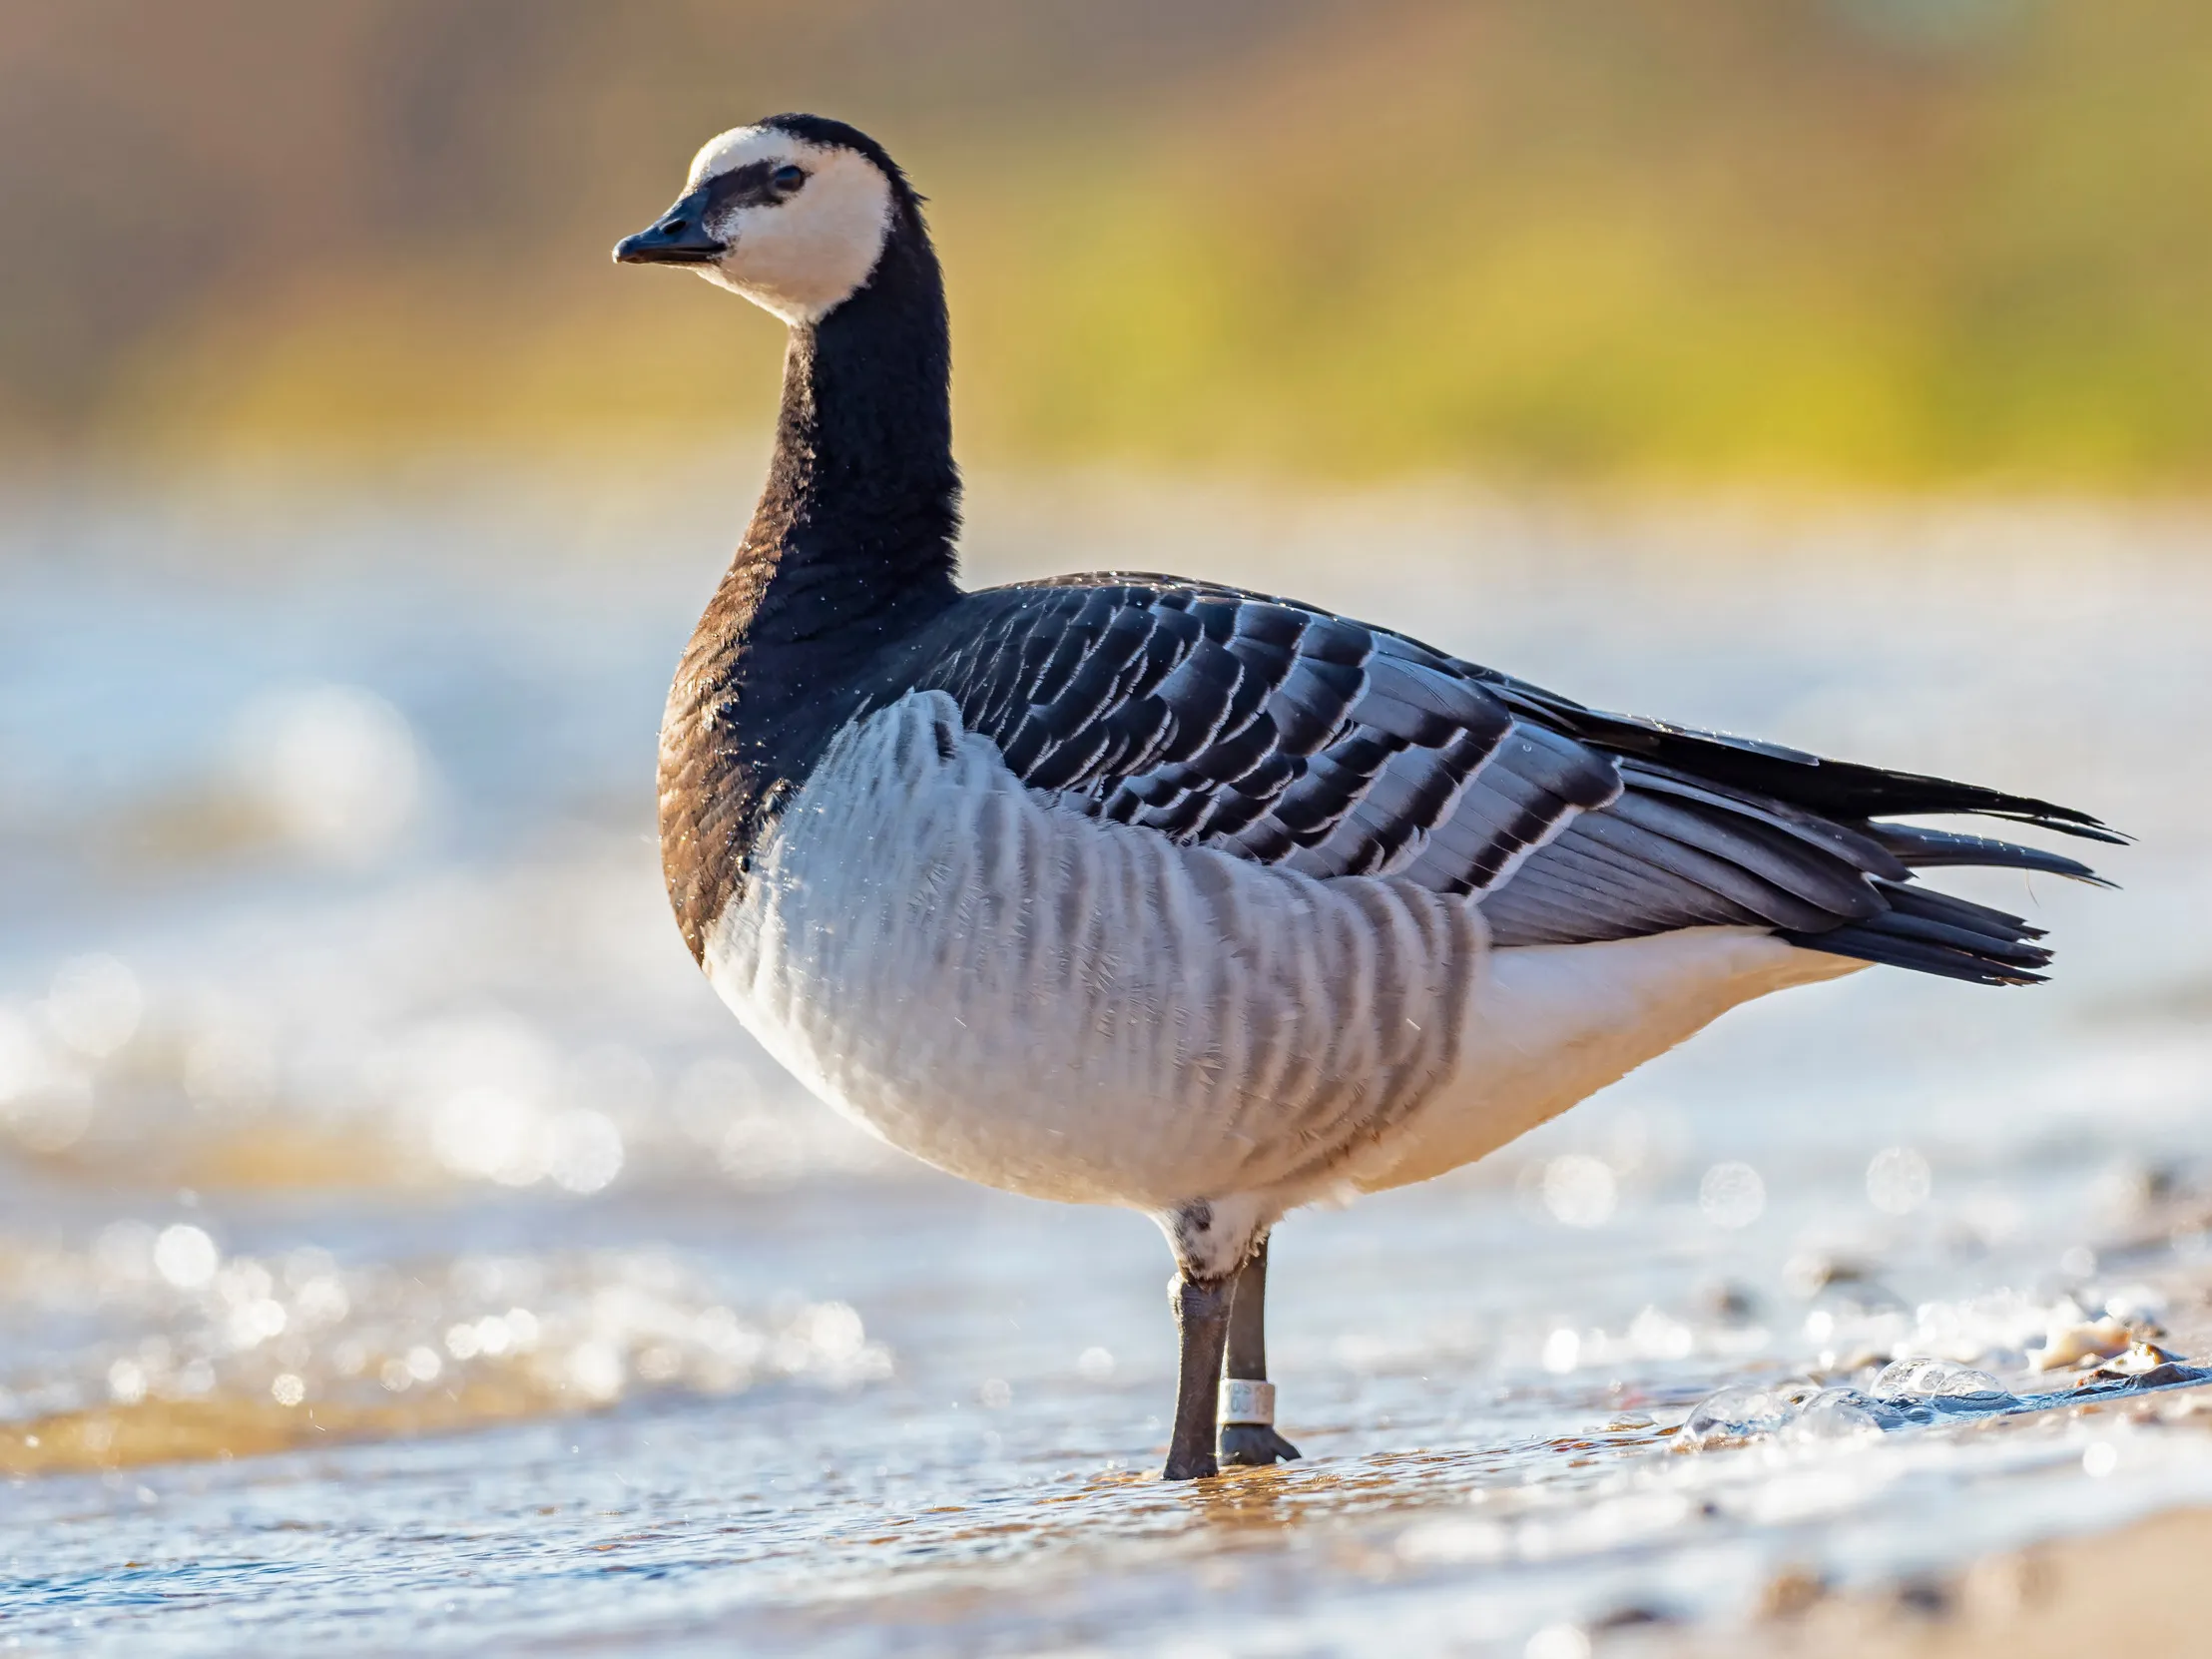 A lone Barnacle Goose in the shallow water surrounded by greenery.